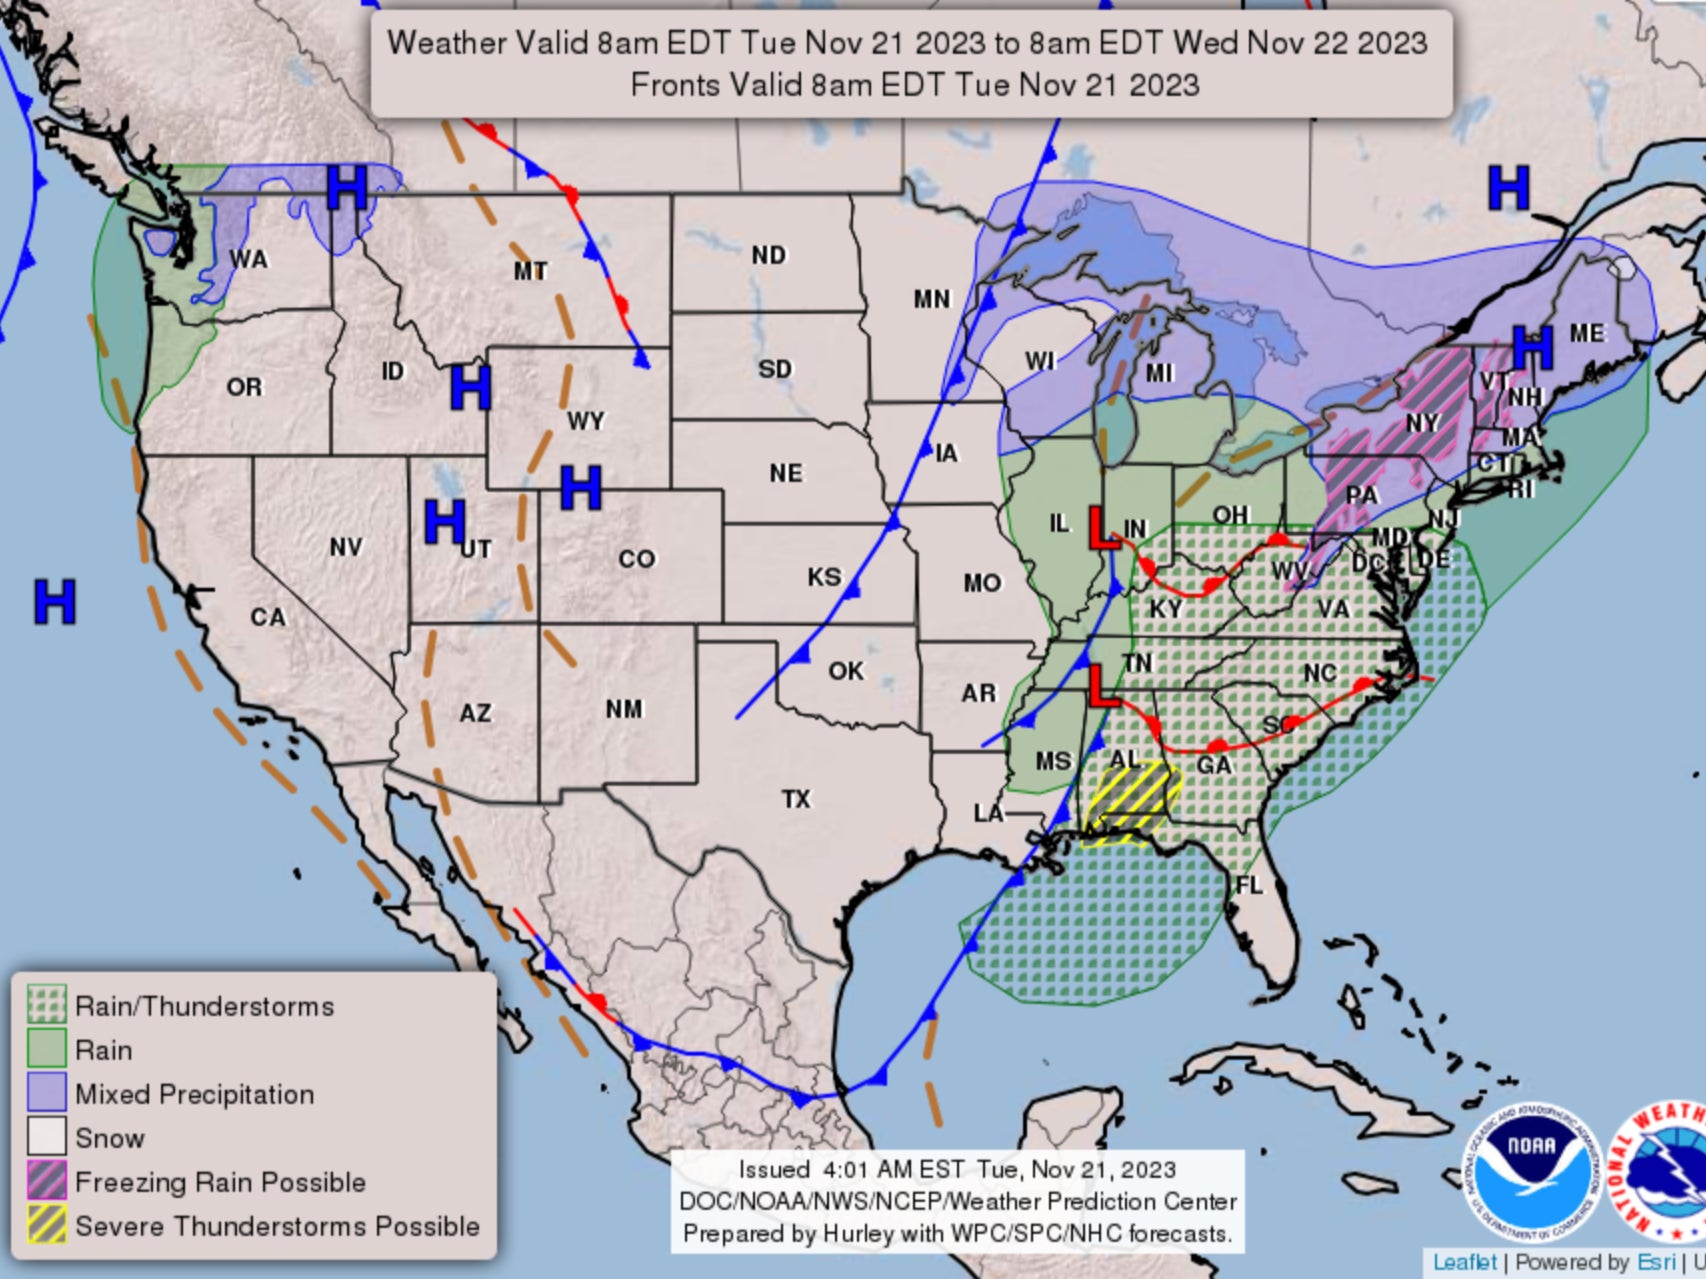 A National Weather Service forecast map showing freezing rain arriving in the northeast and thunderstorms forming in the Midwest just in time to disrupt Thanksgiving travel